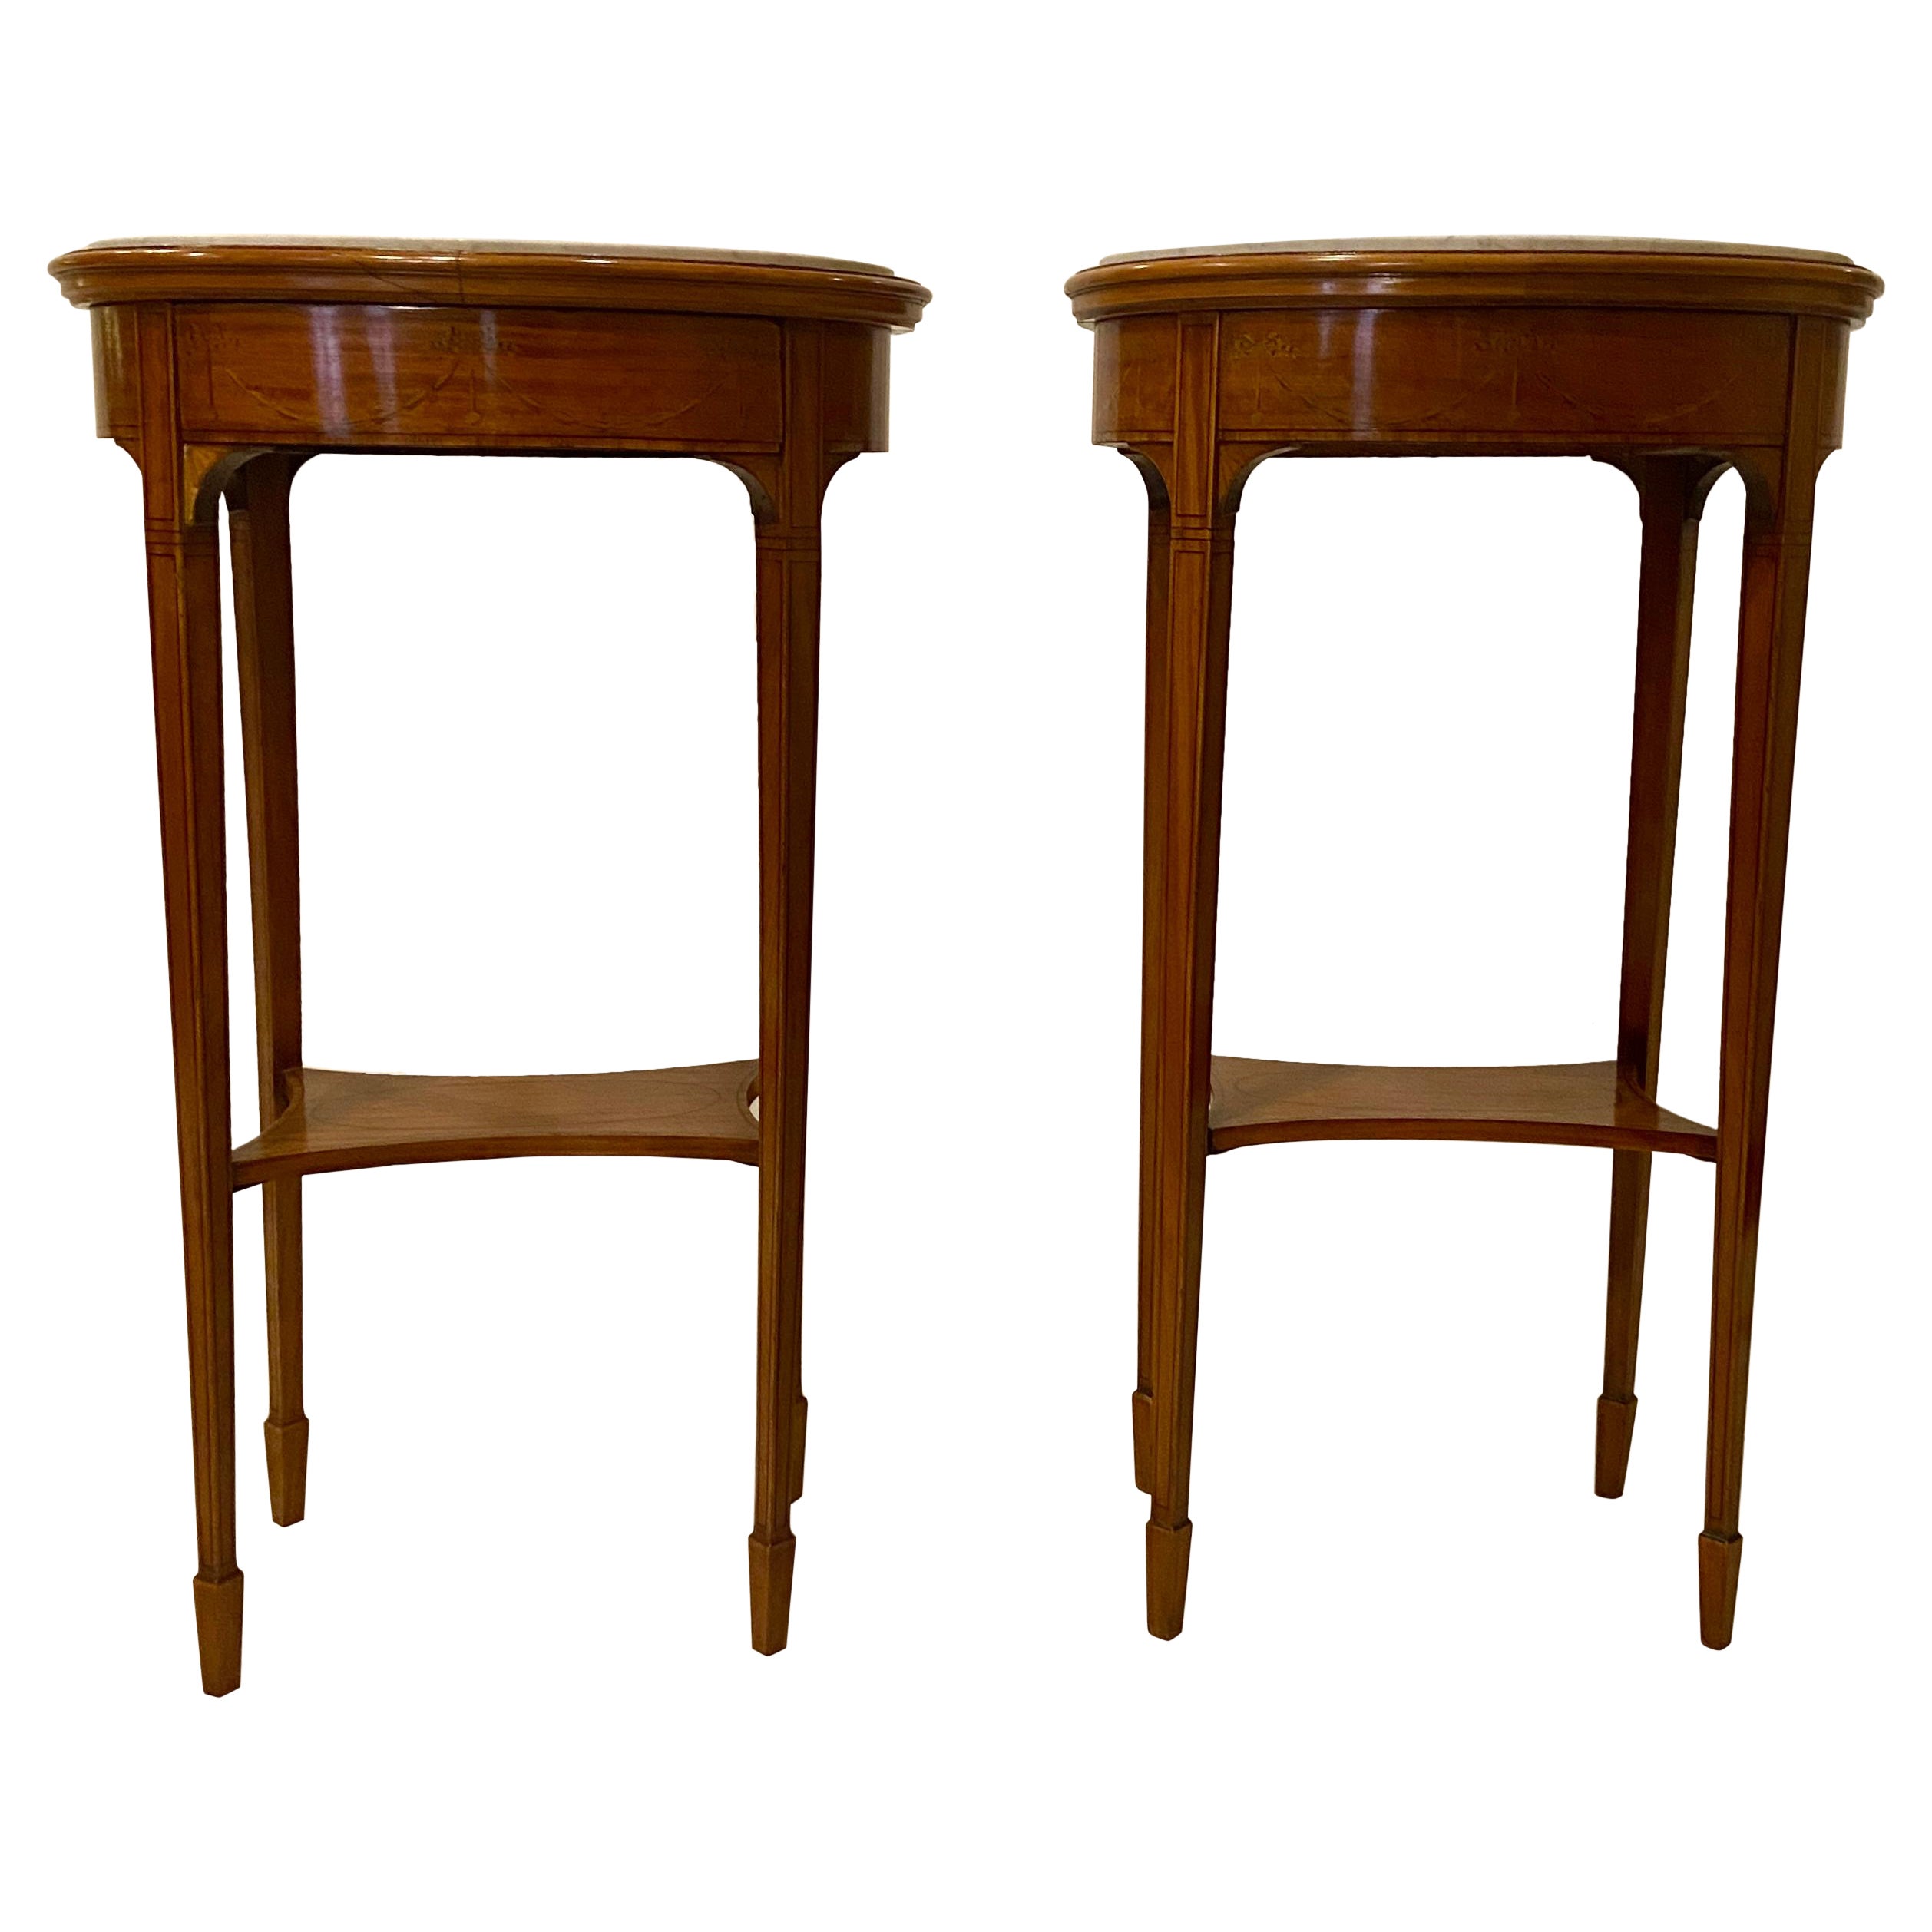 Pair Antique French Grey and White Marble-Top Satinwood Side Tables with Inlay For Sale